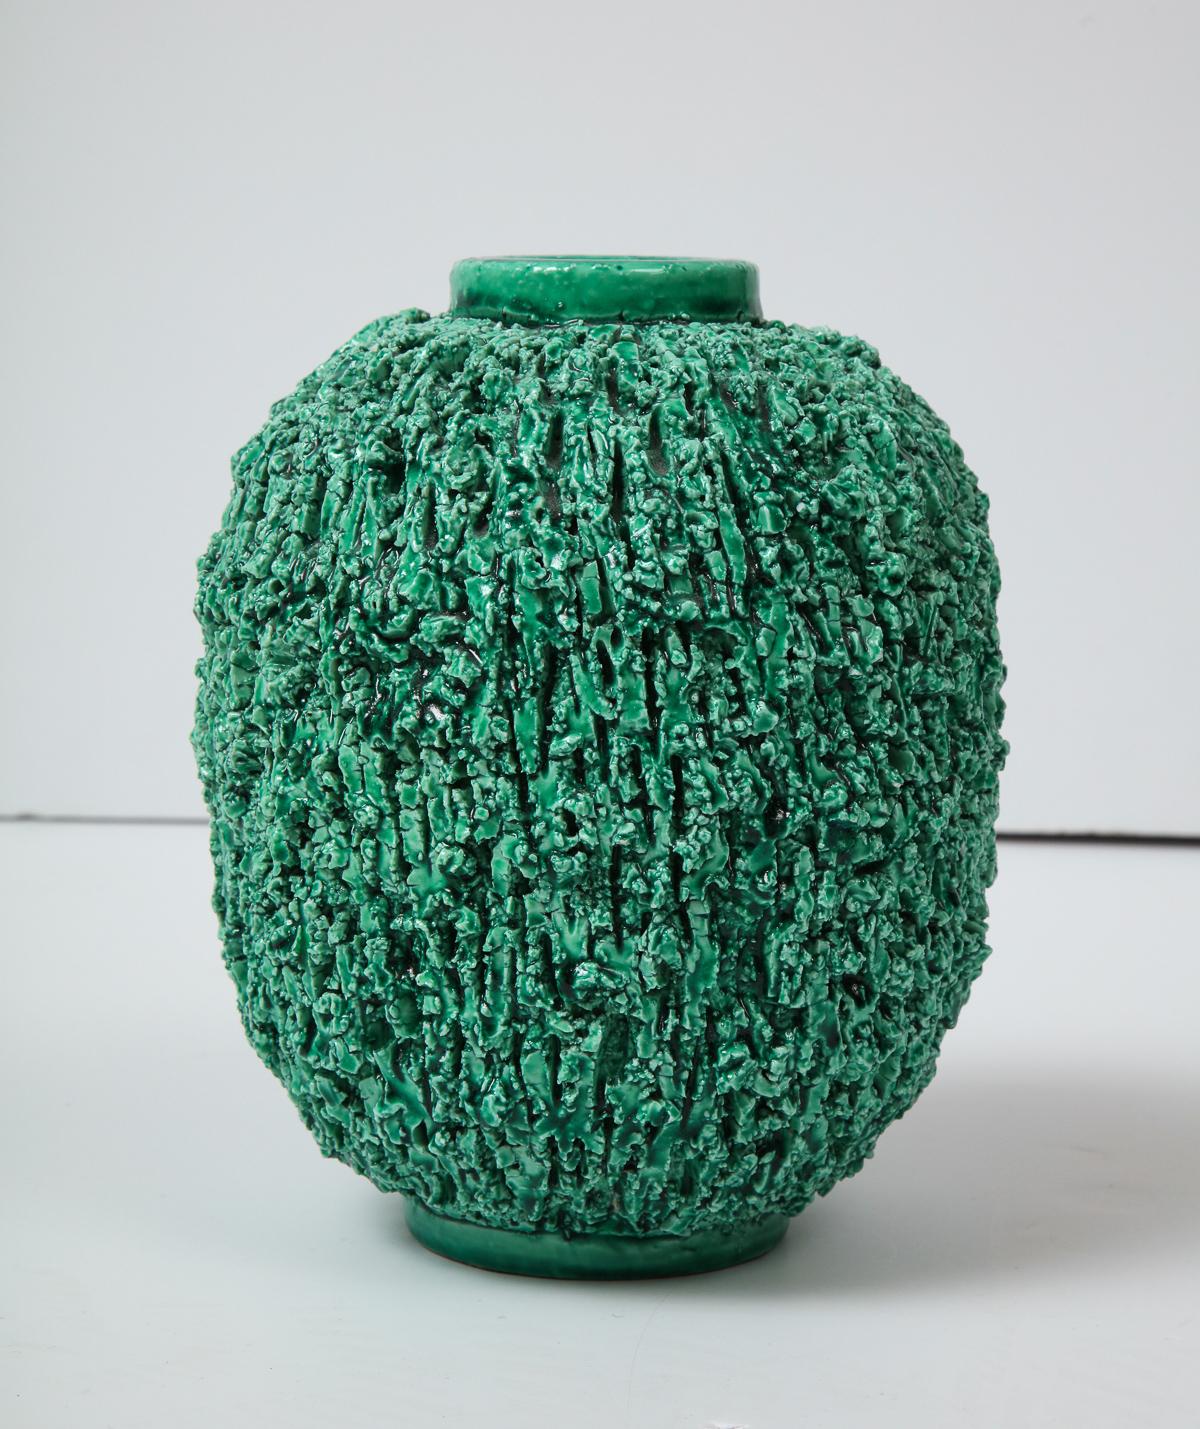 Decorative green ceramic vase by Gunnar Nylund, Gustavsberg, Sweden, circa 1950.
This is the large size of three vases called 